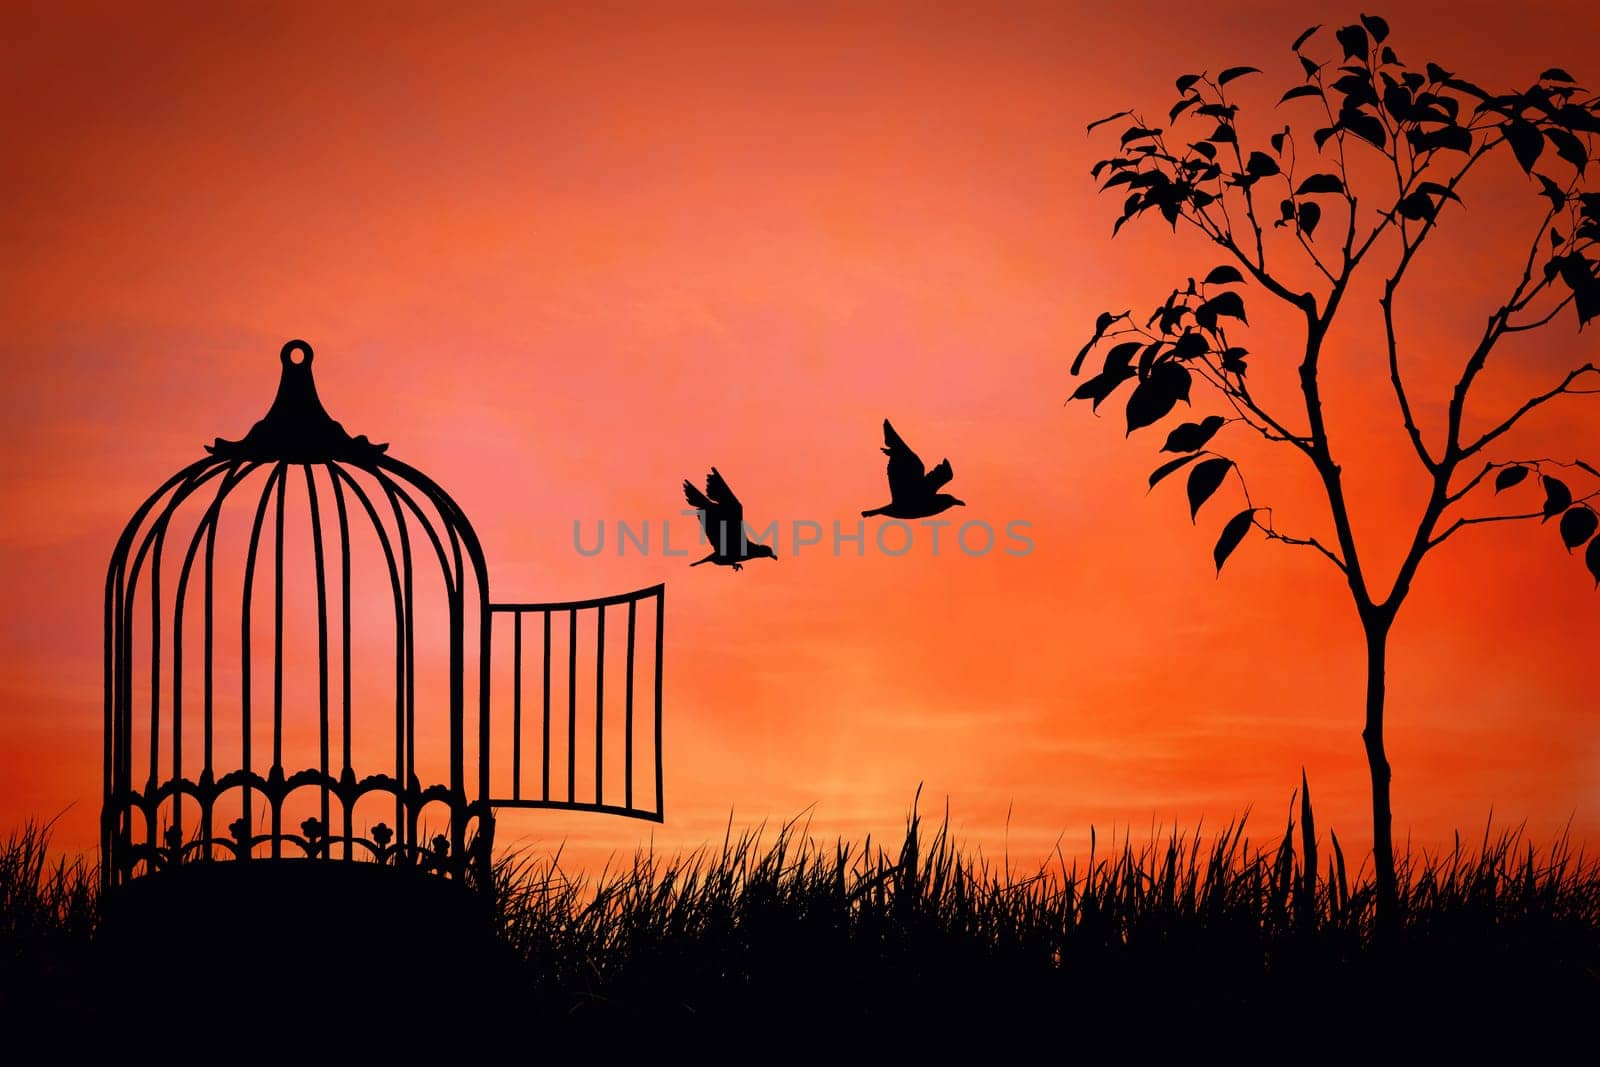 Birds couple escaping from the cage. Freedom concept. Released to nature